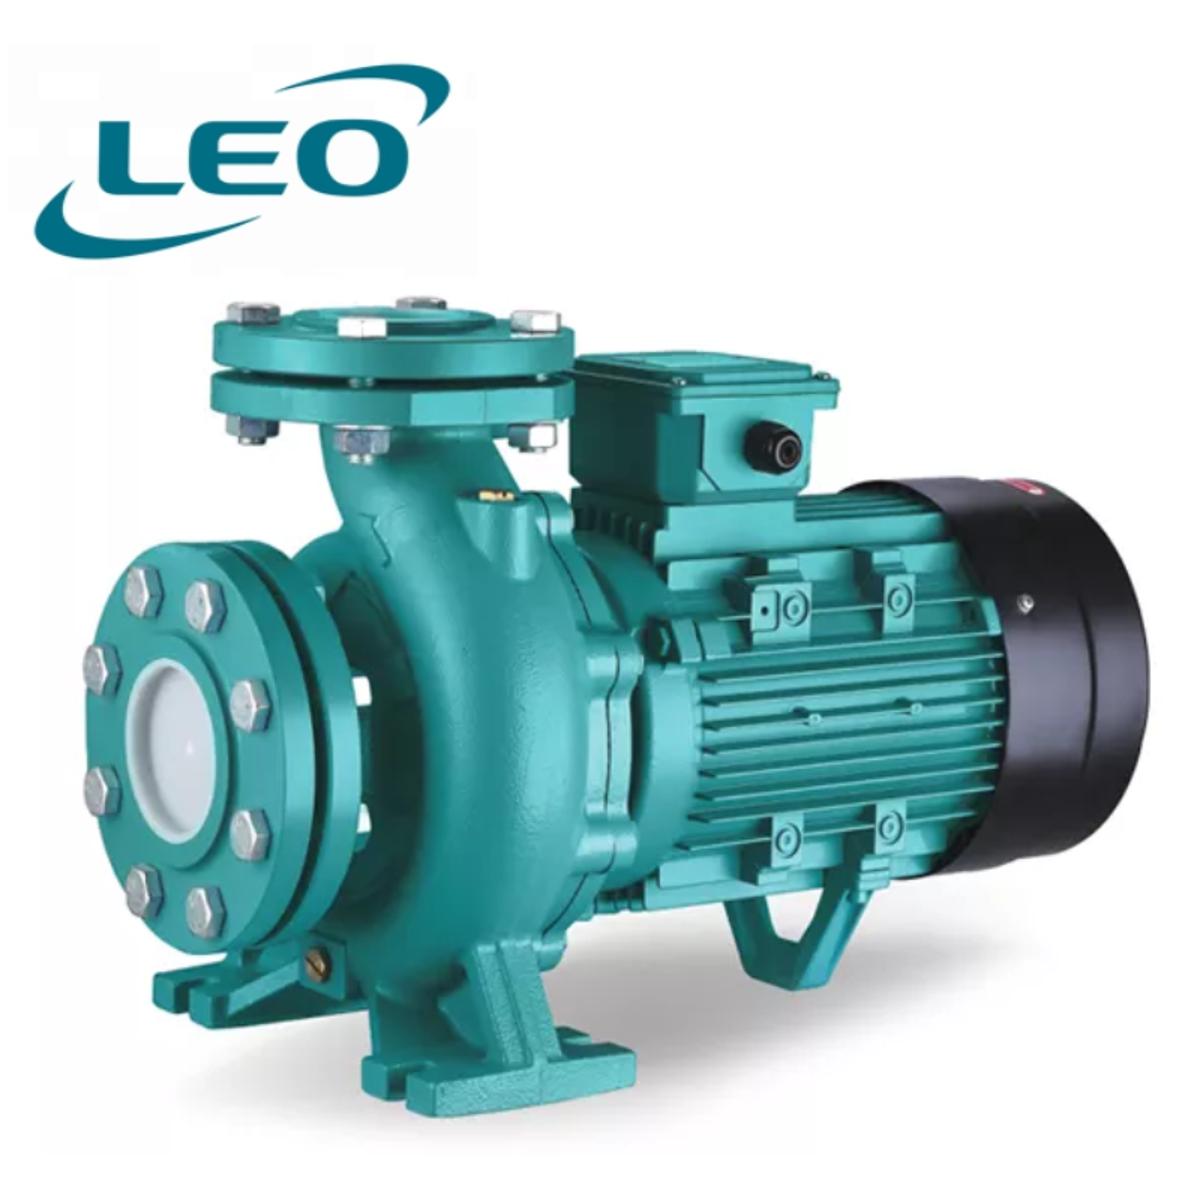 LEO - XST-50-125-22 - 2200 W - 3.0 HP - Clean Water HEAVY DUTY Centrifugal Pump With FLANGES  - 380V~400V THREE PHASE - SIZE :- 2 1-2" x 2" - European STANDARD